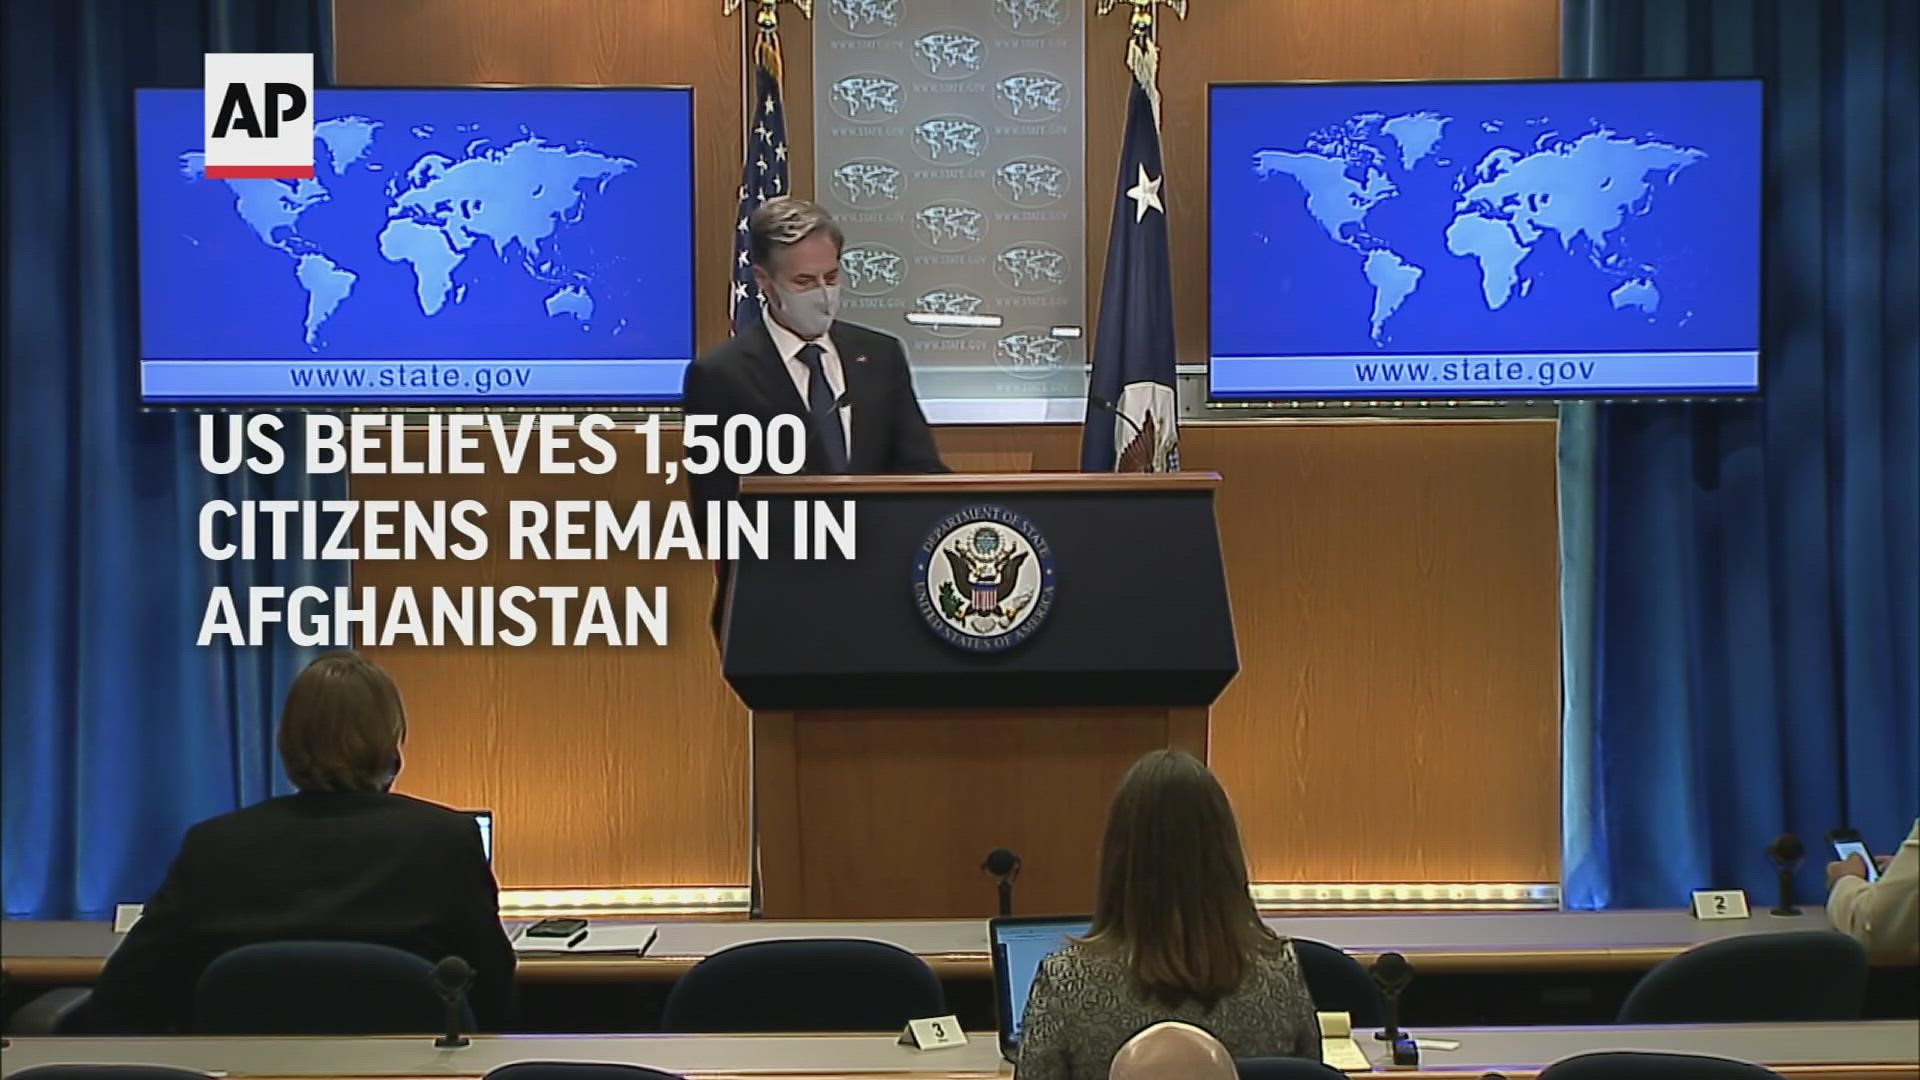 U.S. Secretary of State Antony Blinken says the administration believes about 1,500 American citizens remain in Afghanistan.